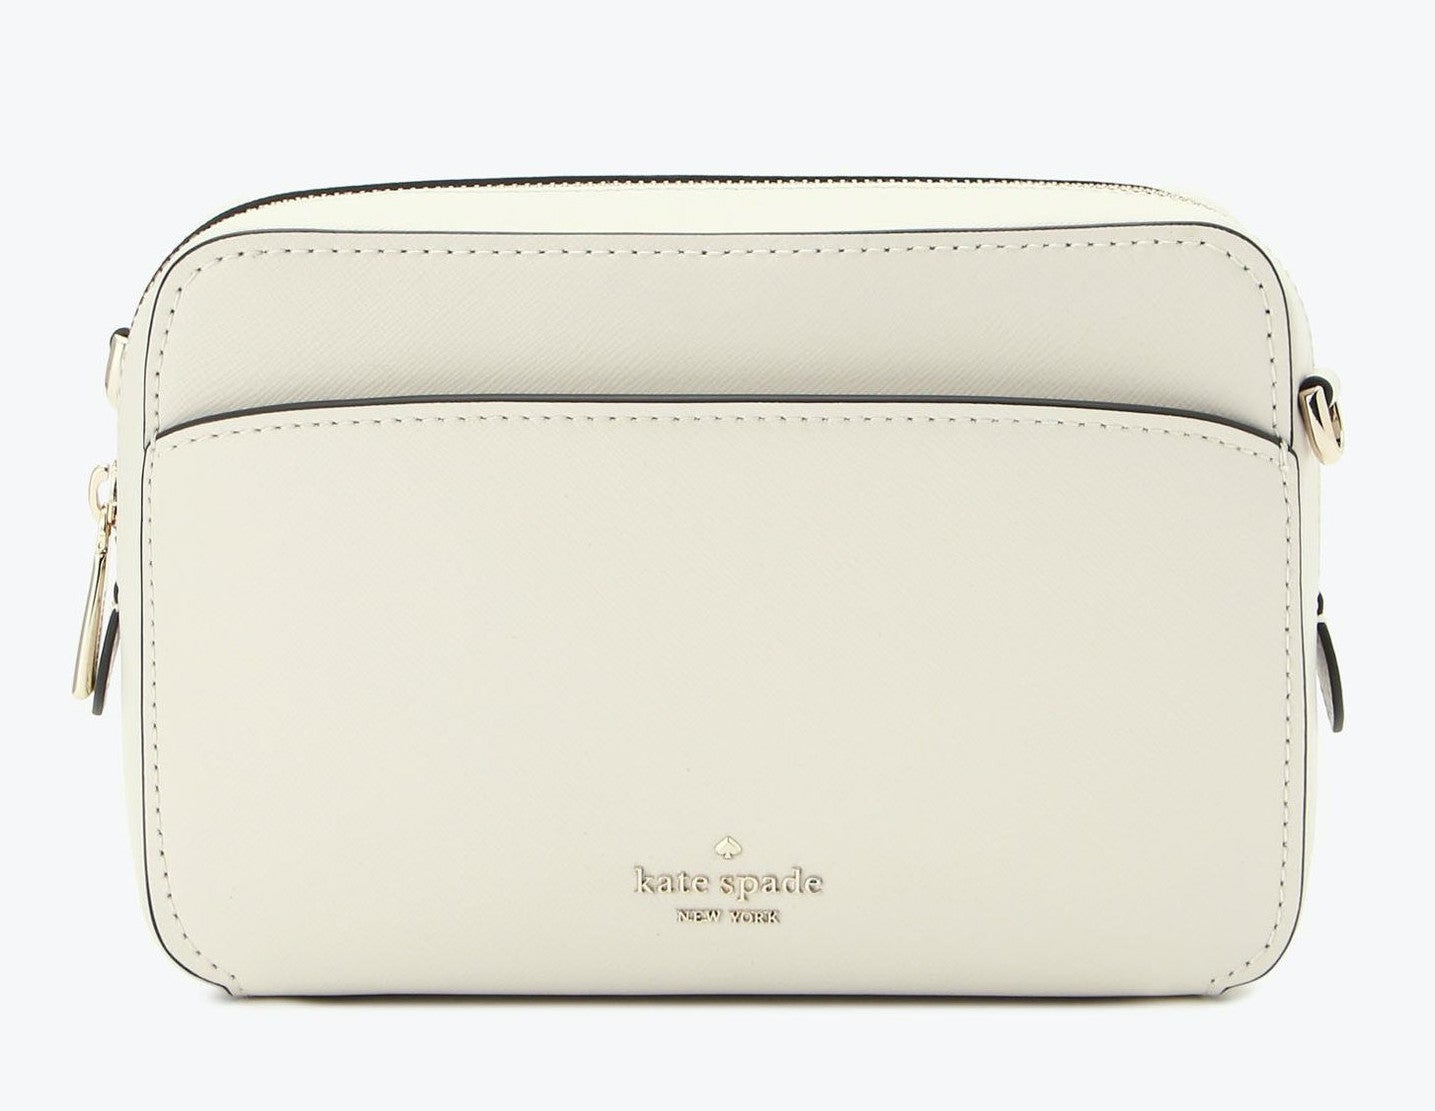 Kate Spade Deal: Save $180 on the Lauryn Camera Bag | Entertainment Tonight